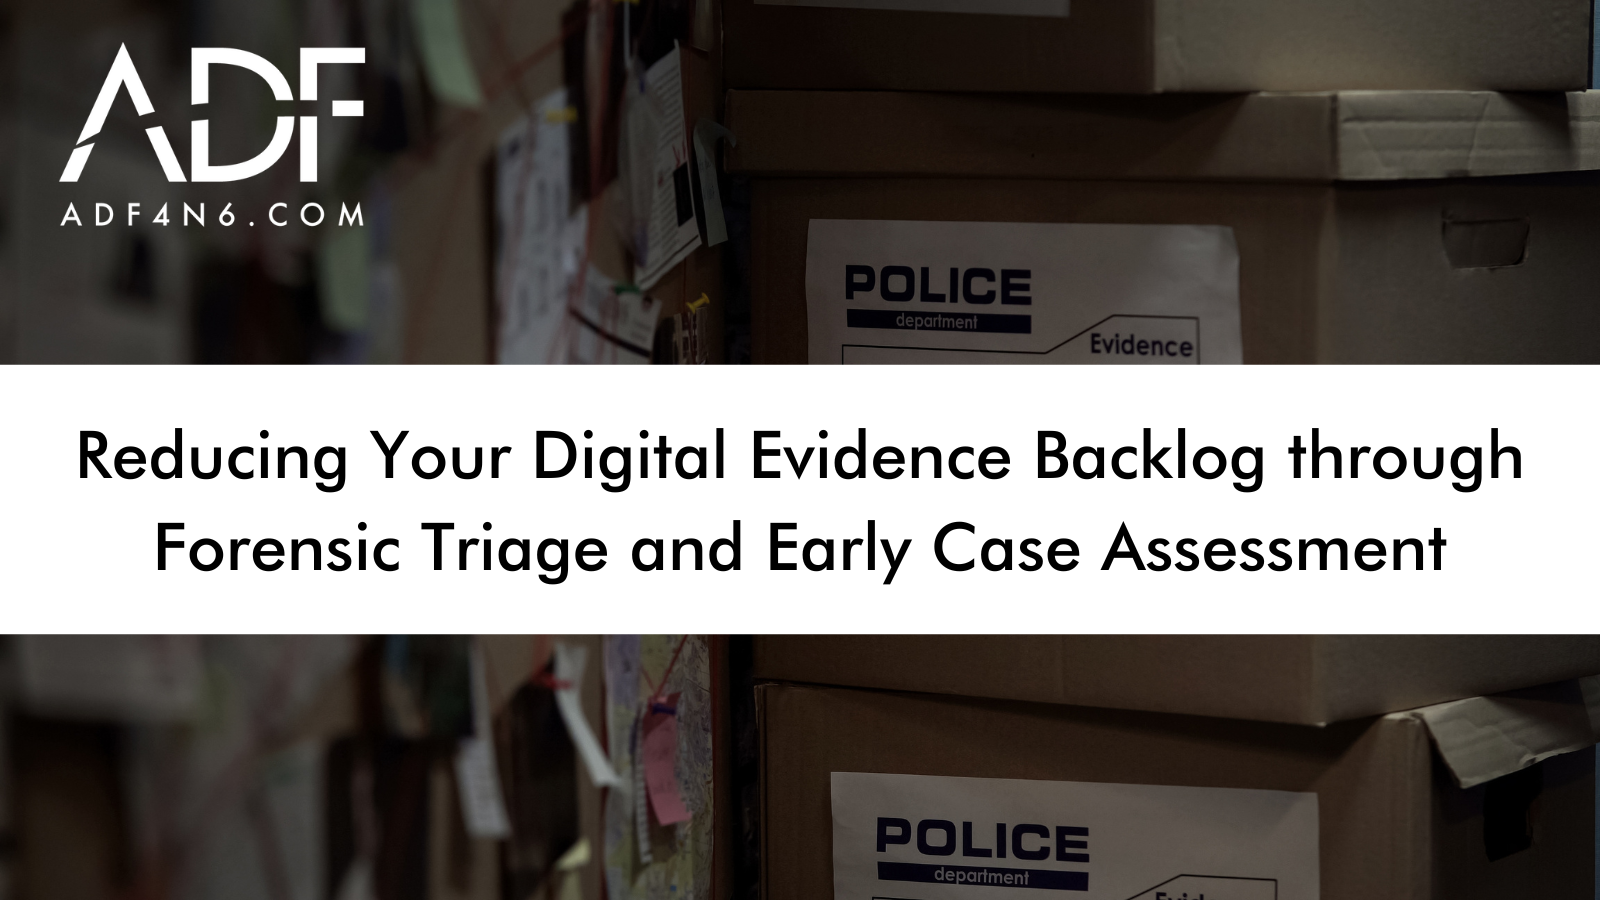 Reducing Your Digital Evidence Backlog through Forensic Triage and Early Case Assessment